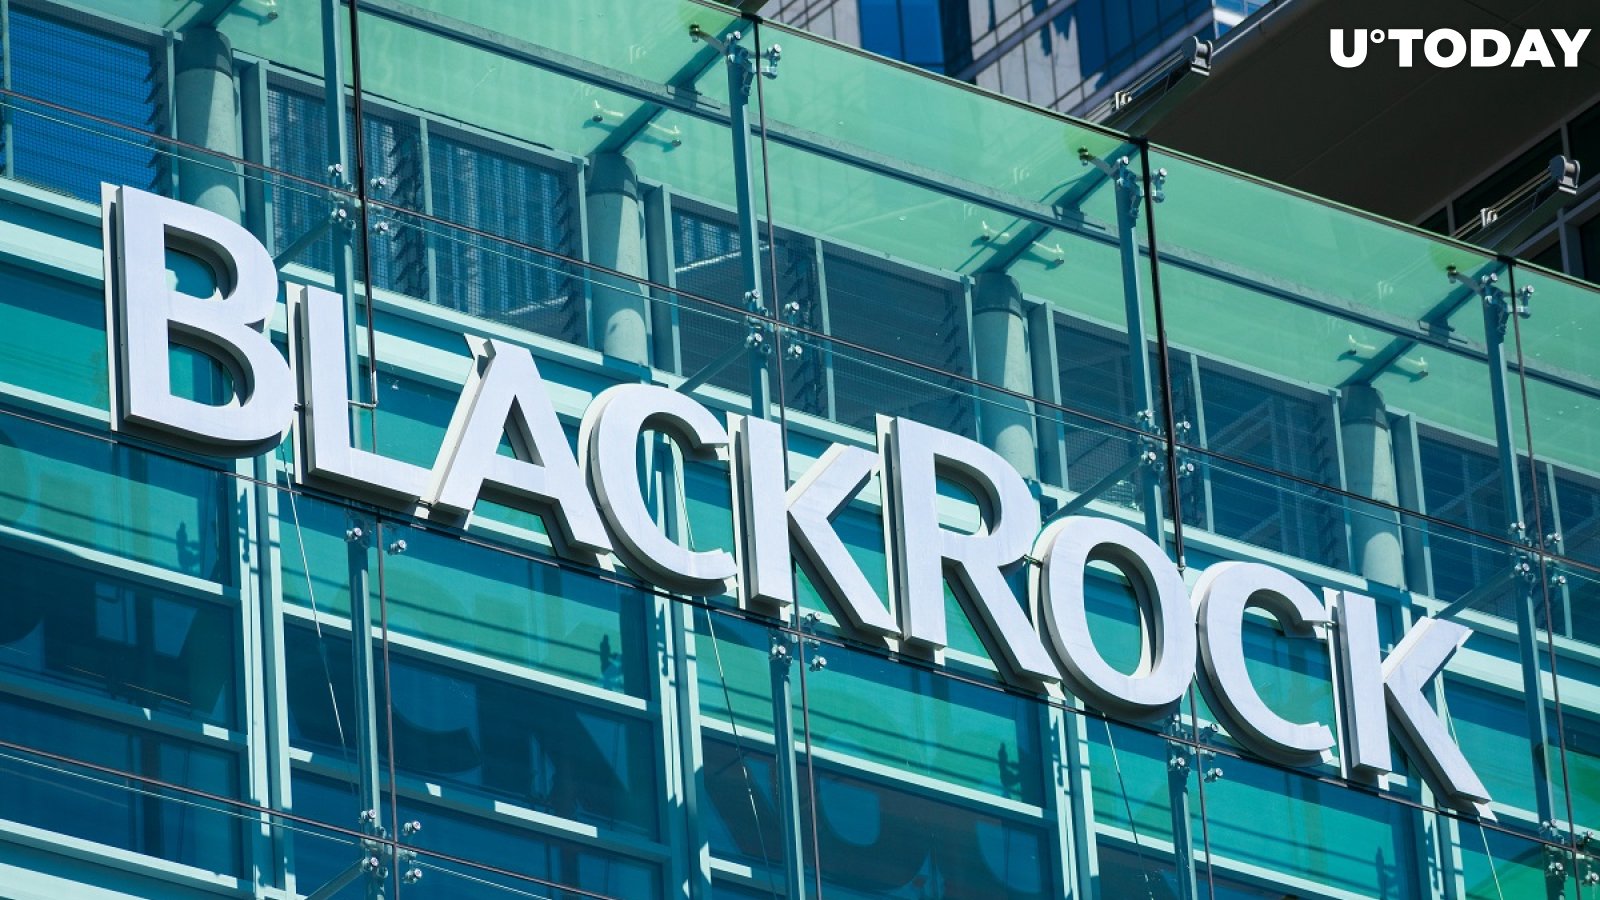 BlackRock to Become Bitcoin's Biggest Holder, Top Analyst Predicts